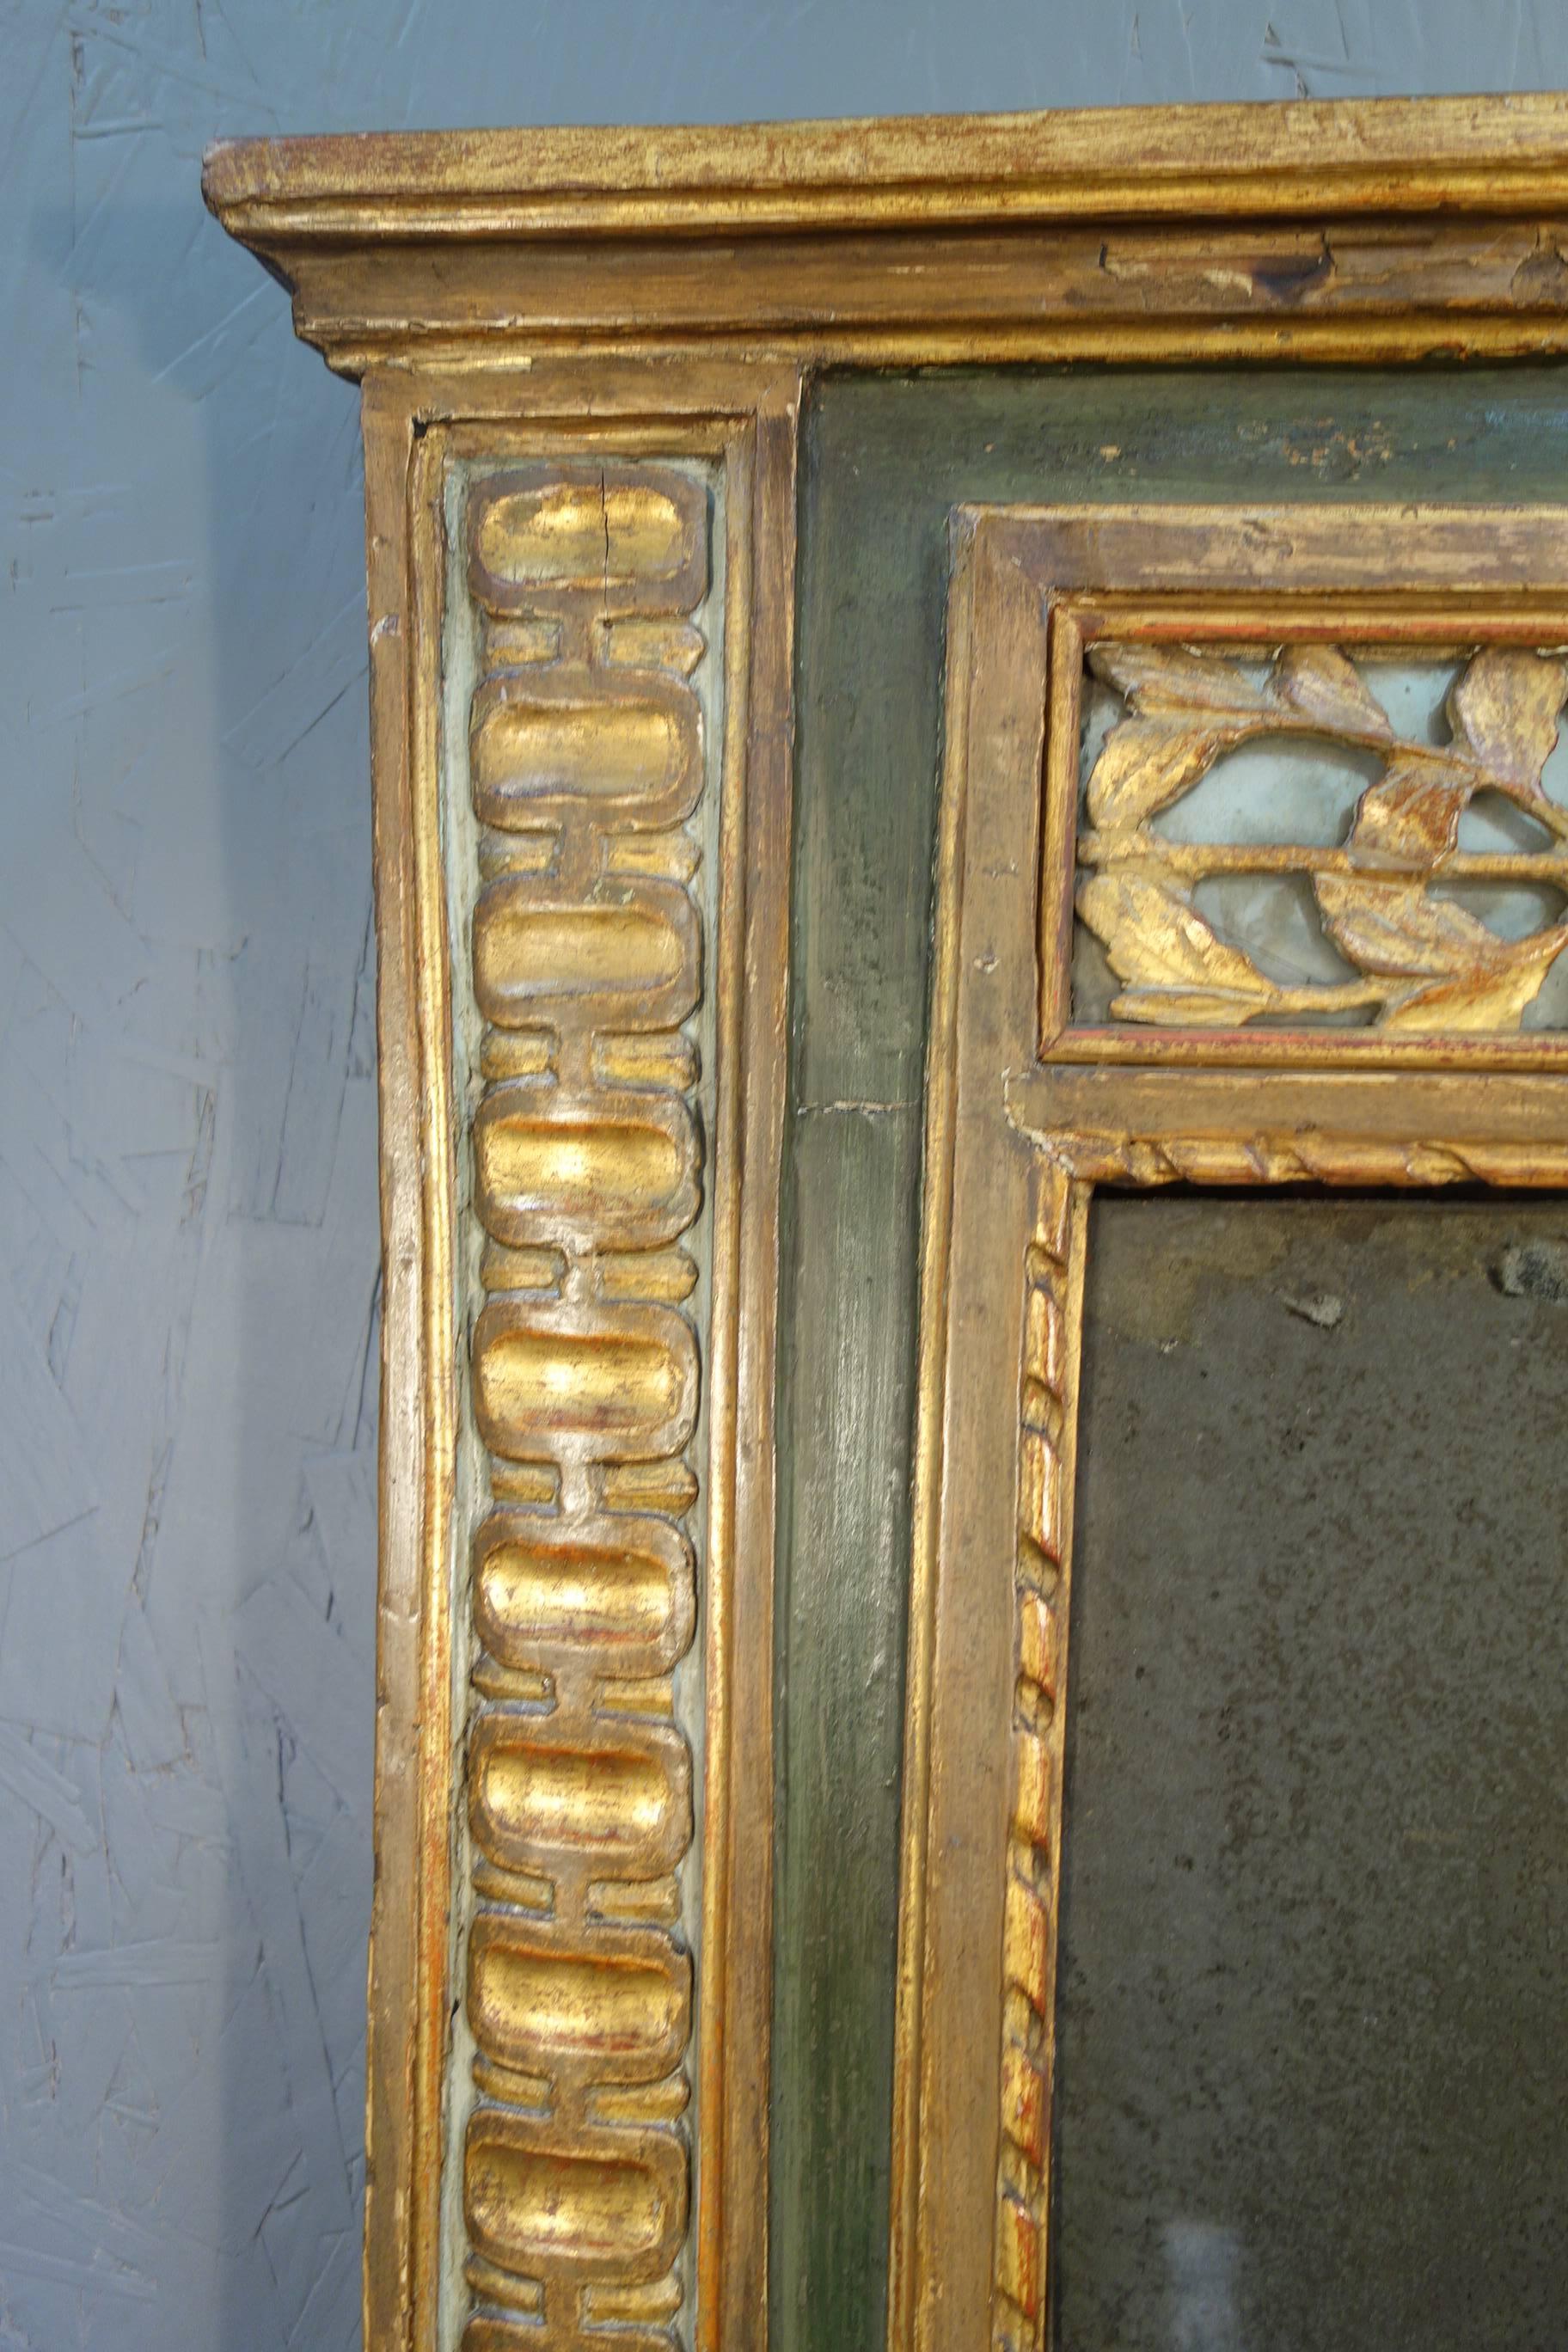 Beautiful early 19th century original silver mirror glass in gold gilded frame with green painted borders; hand-carved decorative wood insert in upper margin.

Measures: 41" H x 27.25" W x 2.5" D.